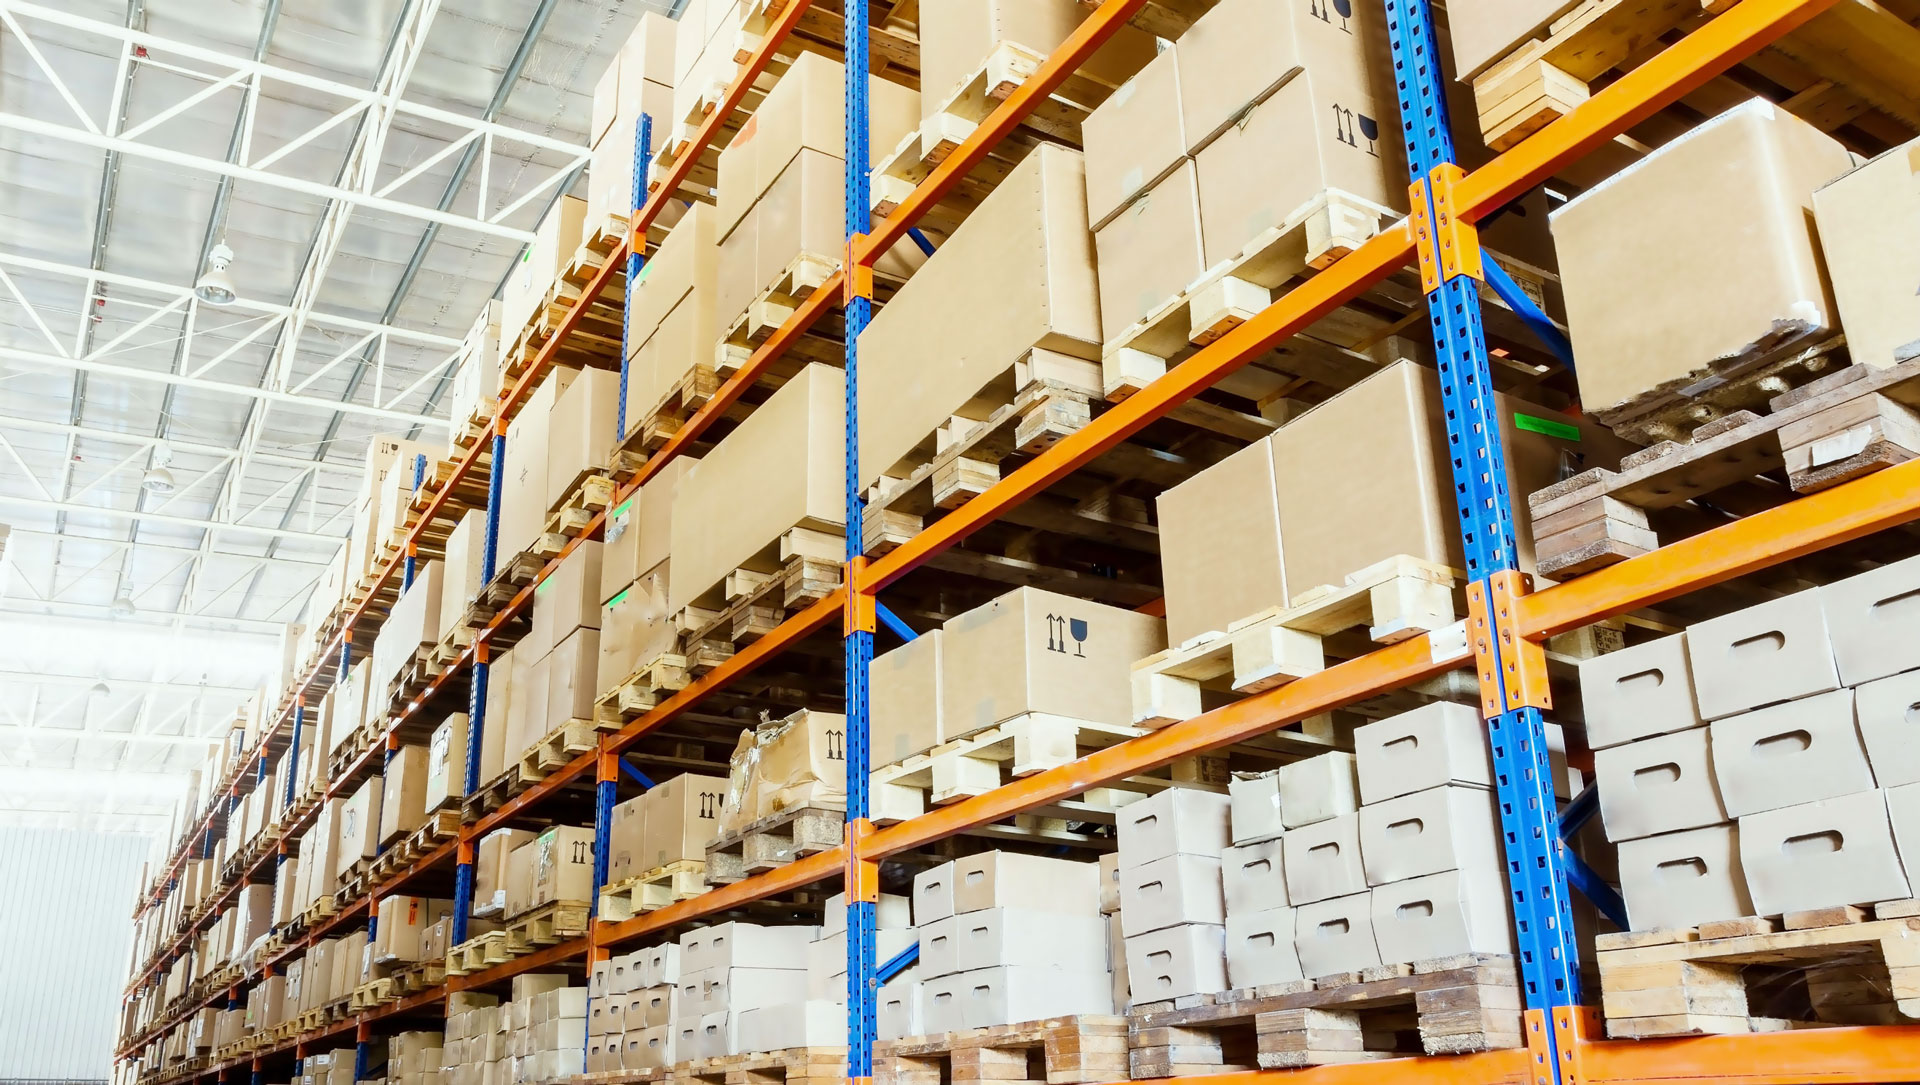 Things to consider when starting your own warehouse business